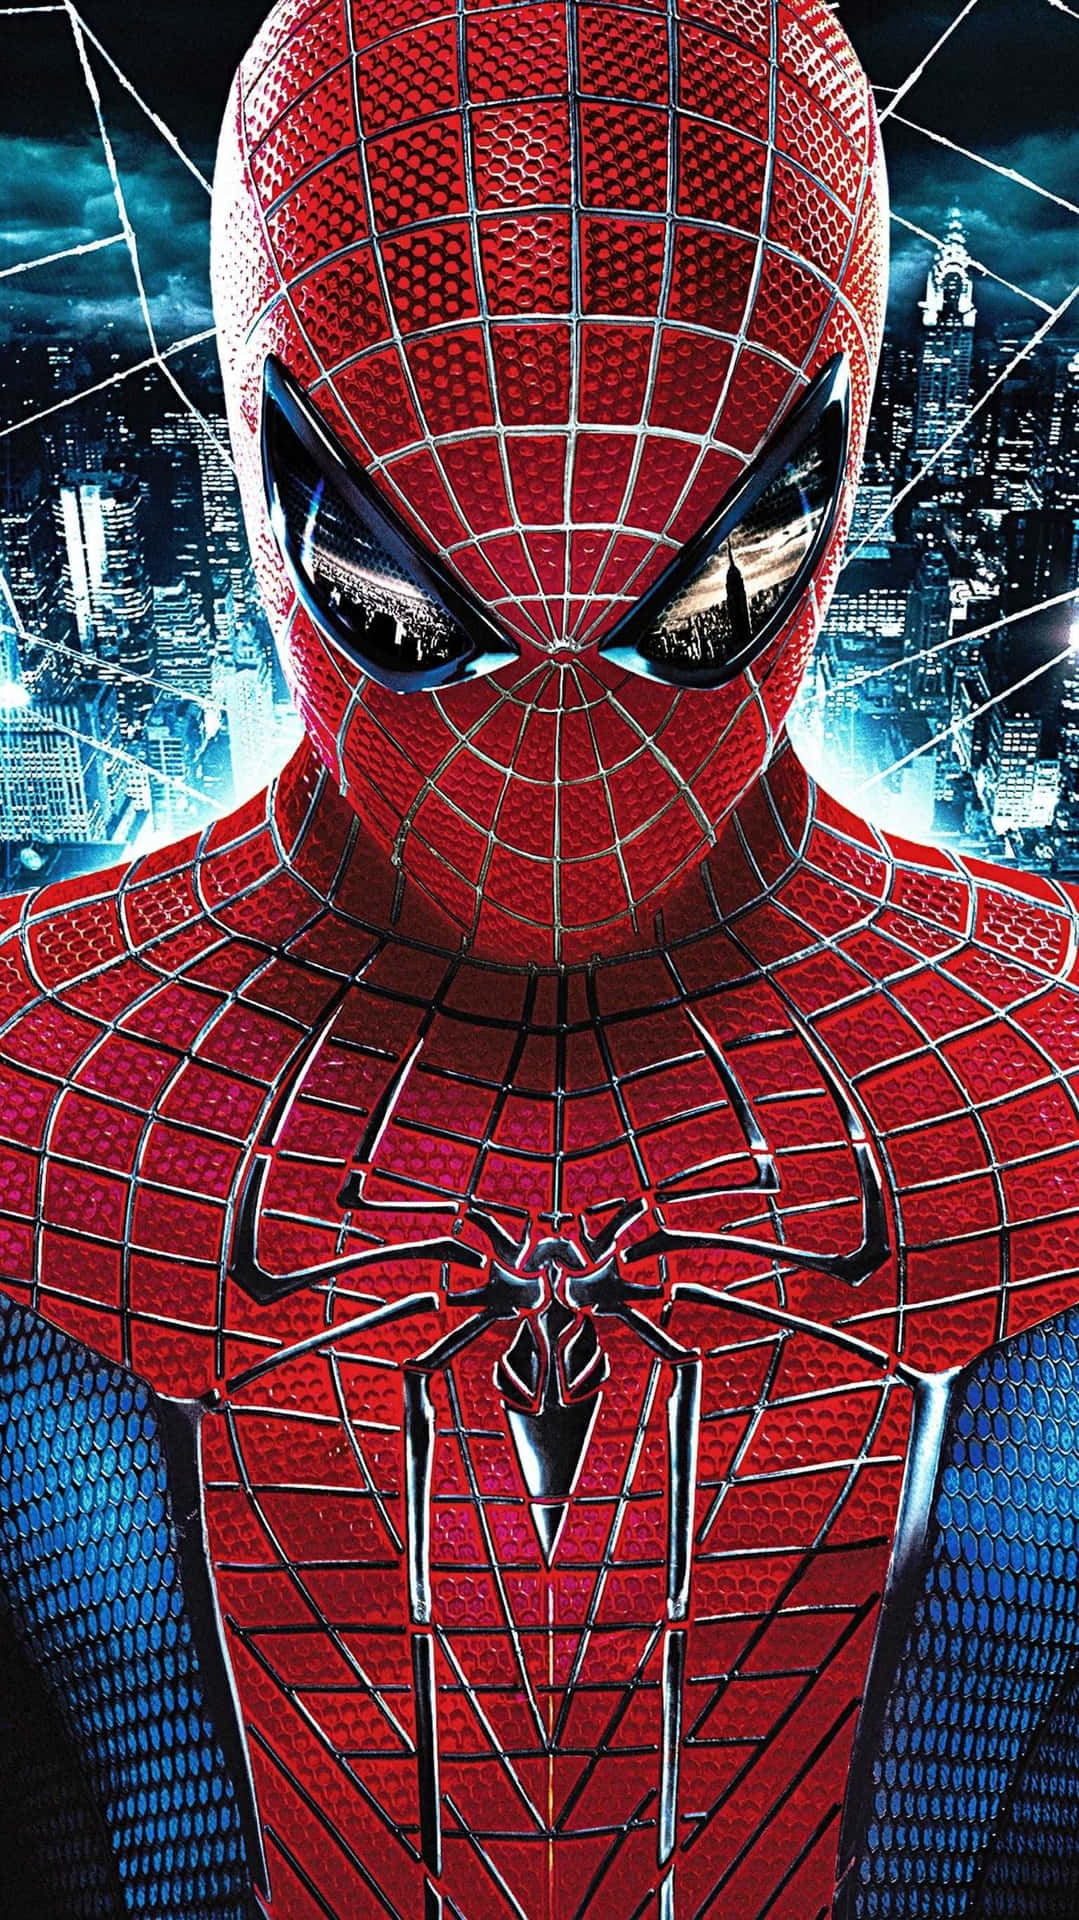 The Amazing Spider - Man Movie Poster Wallpaper